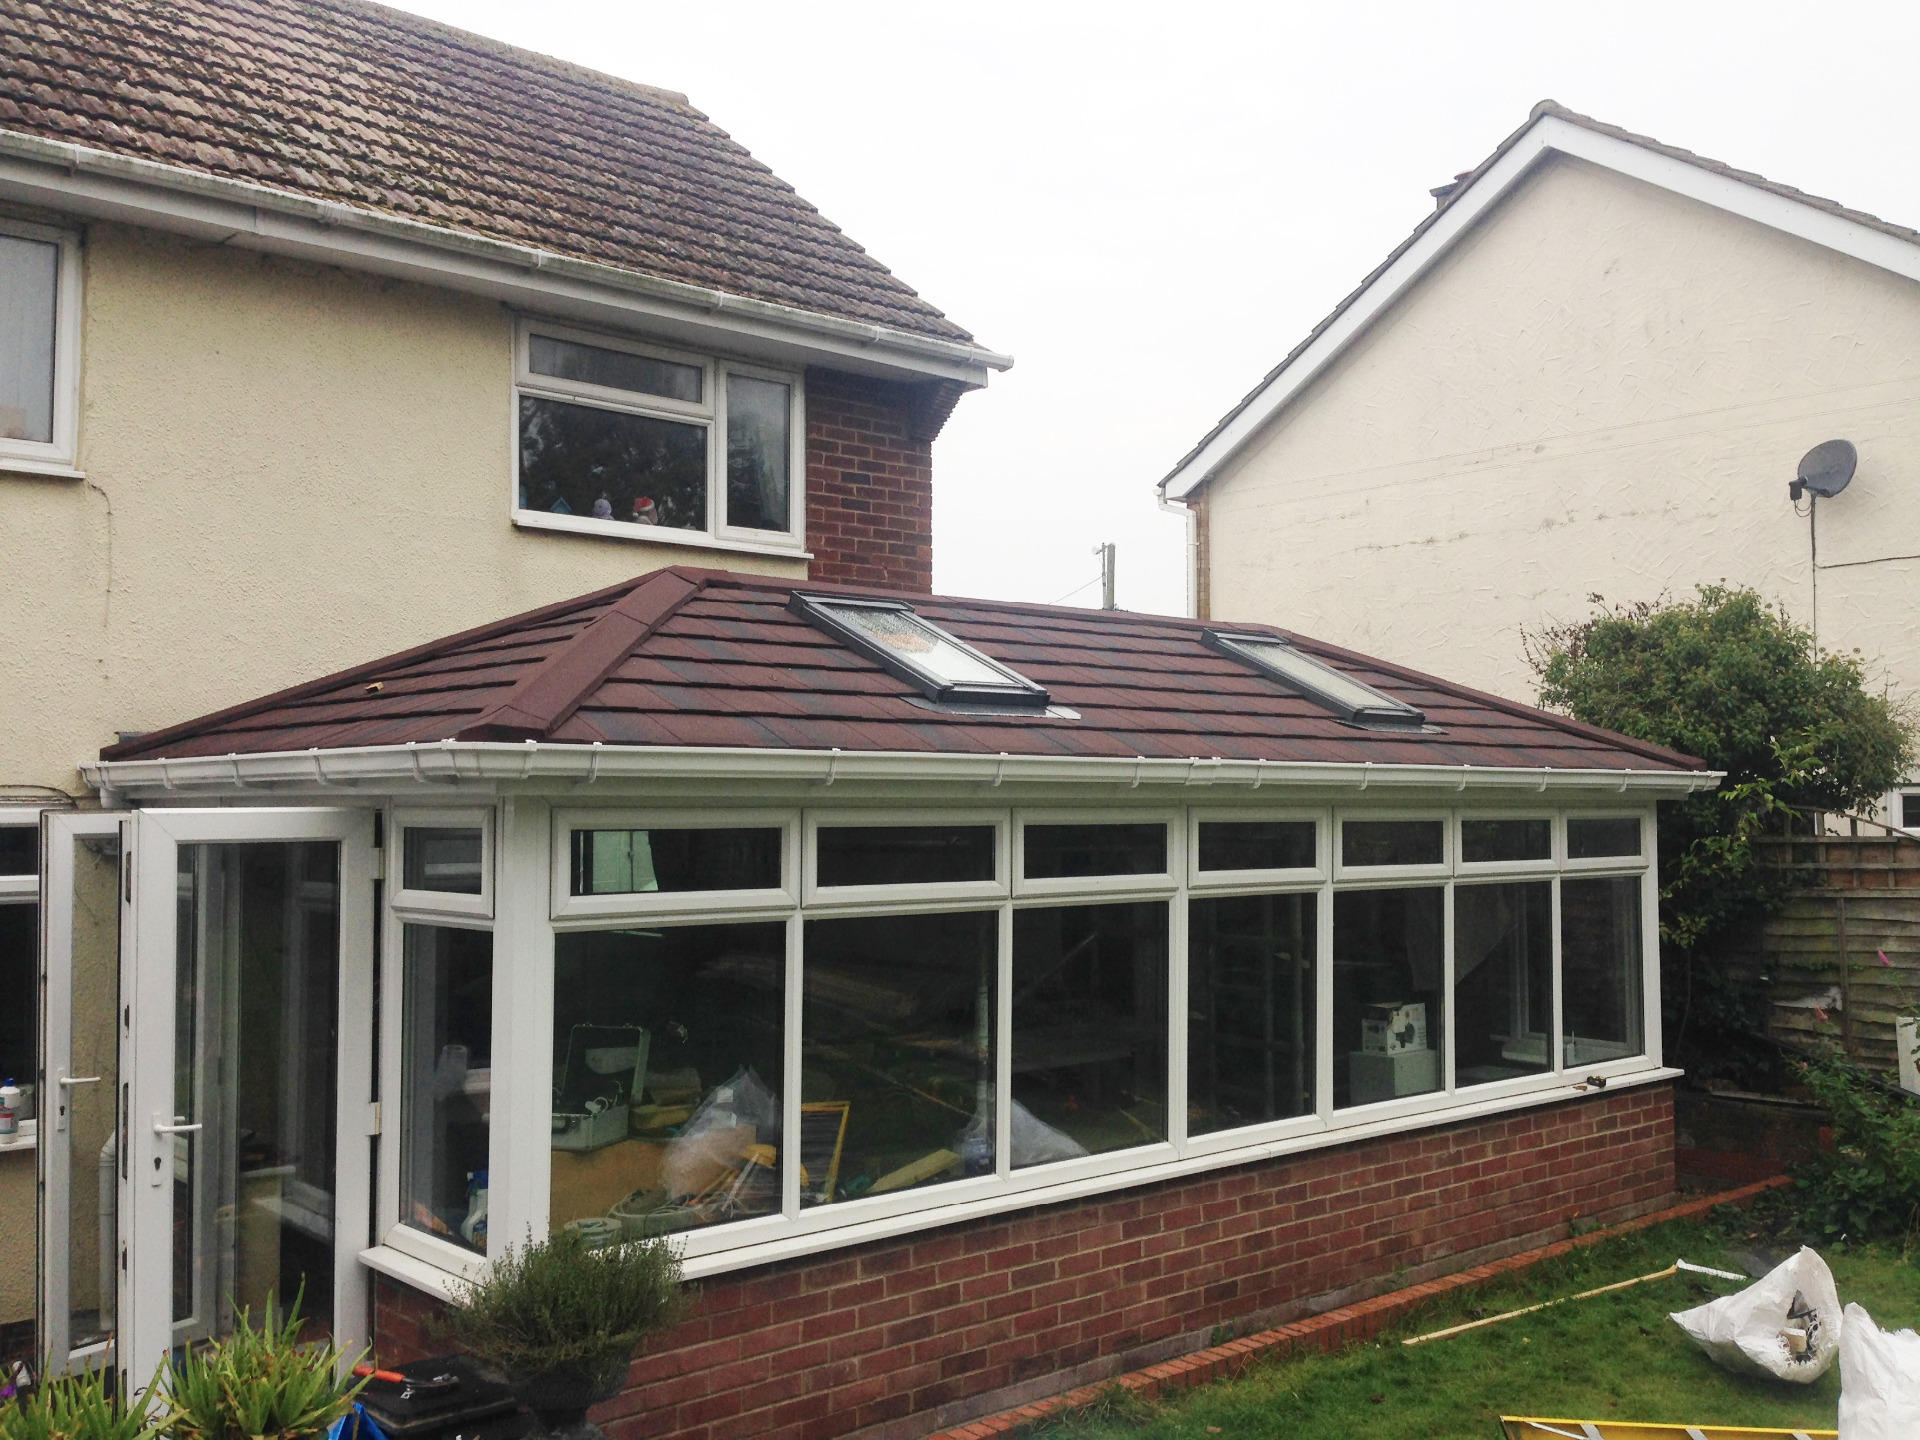 Equinox Tiled Roof System Essex